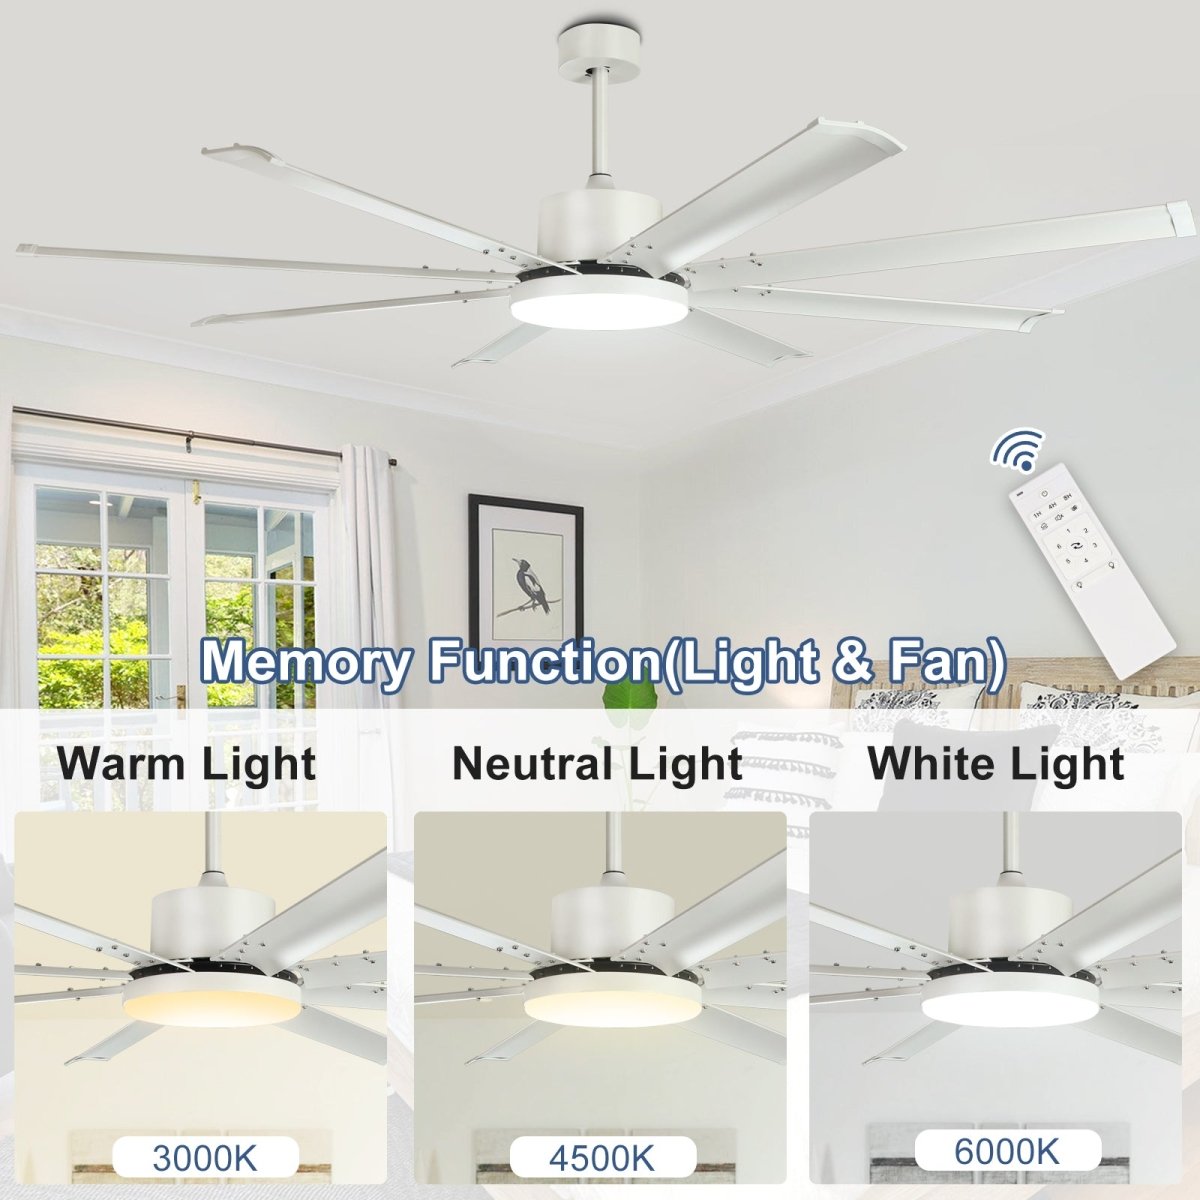 72 Inch Ceiling Fans with Lights and Remote, White Large Ceiling Fan, 6-Speed 8 Aluminum Reversible Blades DC Motor, Industrial Ceiling Fan for Kitchen Living Room Playroom Indoor/Outdoor - WS-FPZ57-24C-8-W 3 | DEPULEY